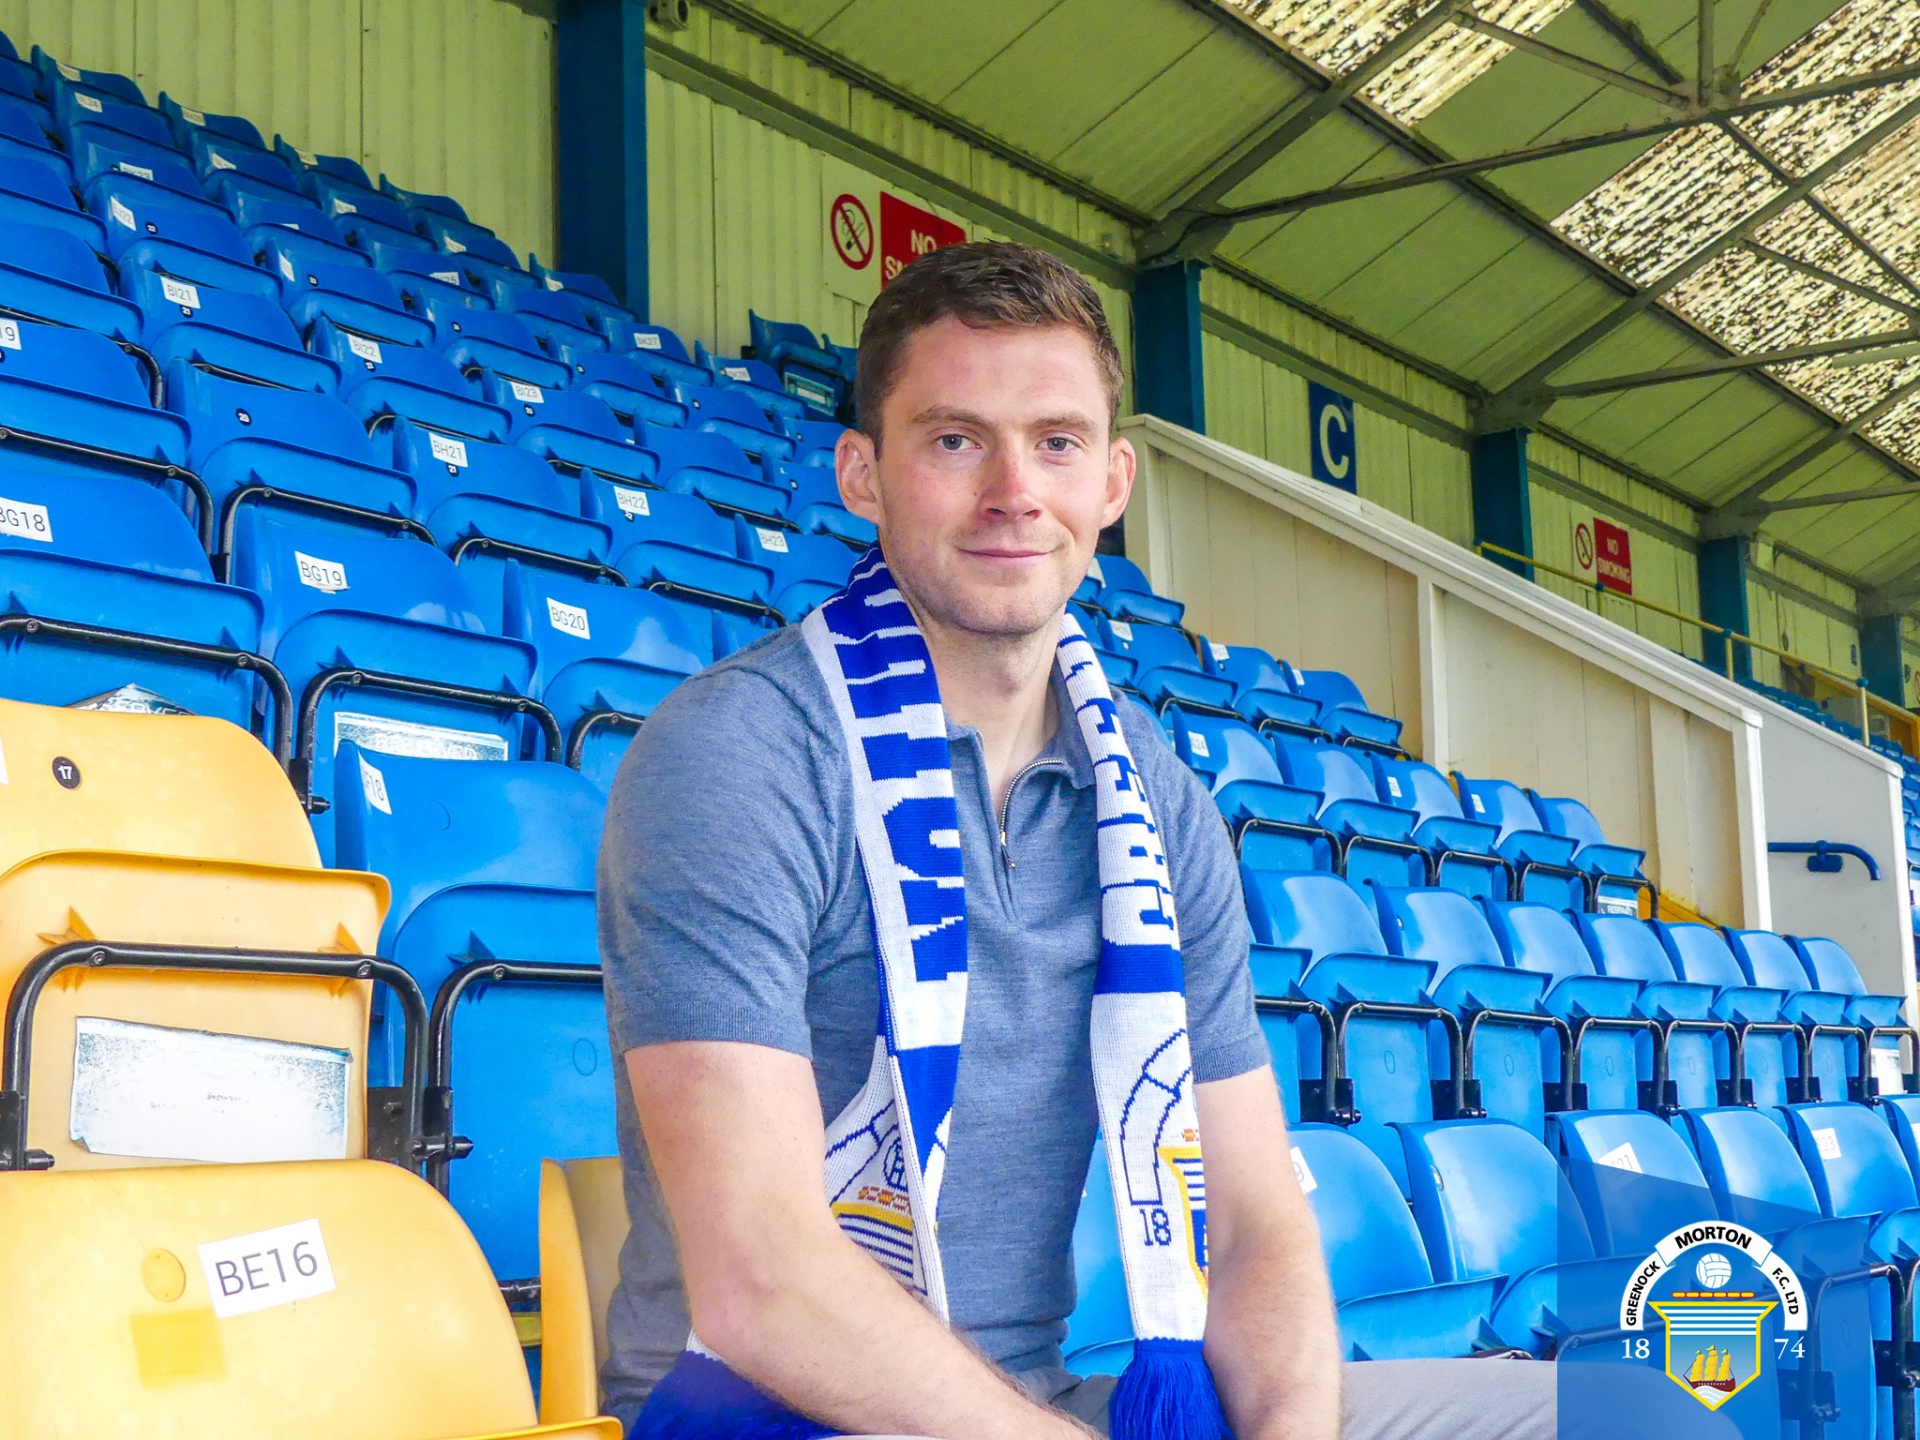 Morton signing Jack Baird says bond with fans convinced him to rejoin club